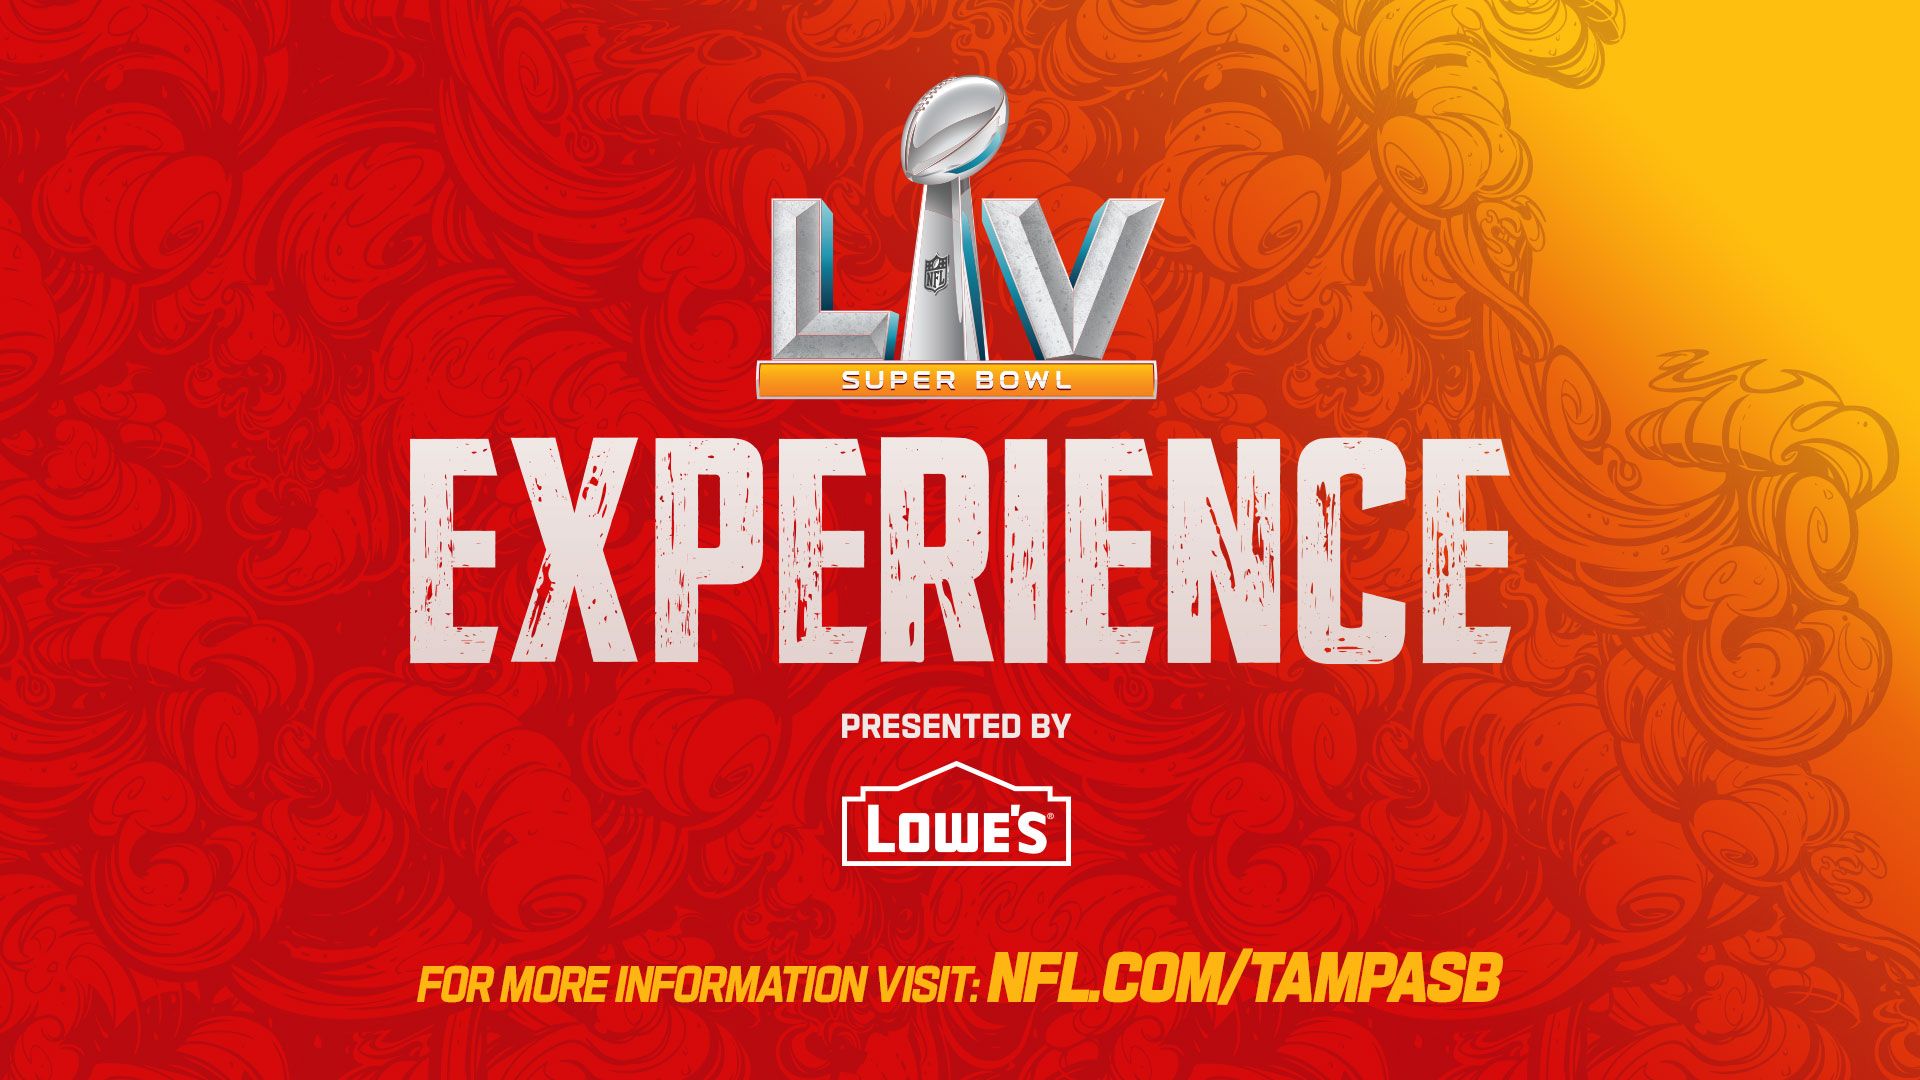 Tampa Bay Super Bowl LV Host Committee you ready to EXPERIENCE an adventure during #SBLV week? For the FIRST TIME EVER, Super Bowl Experience presented will be